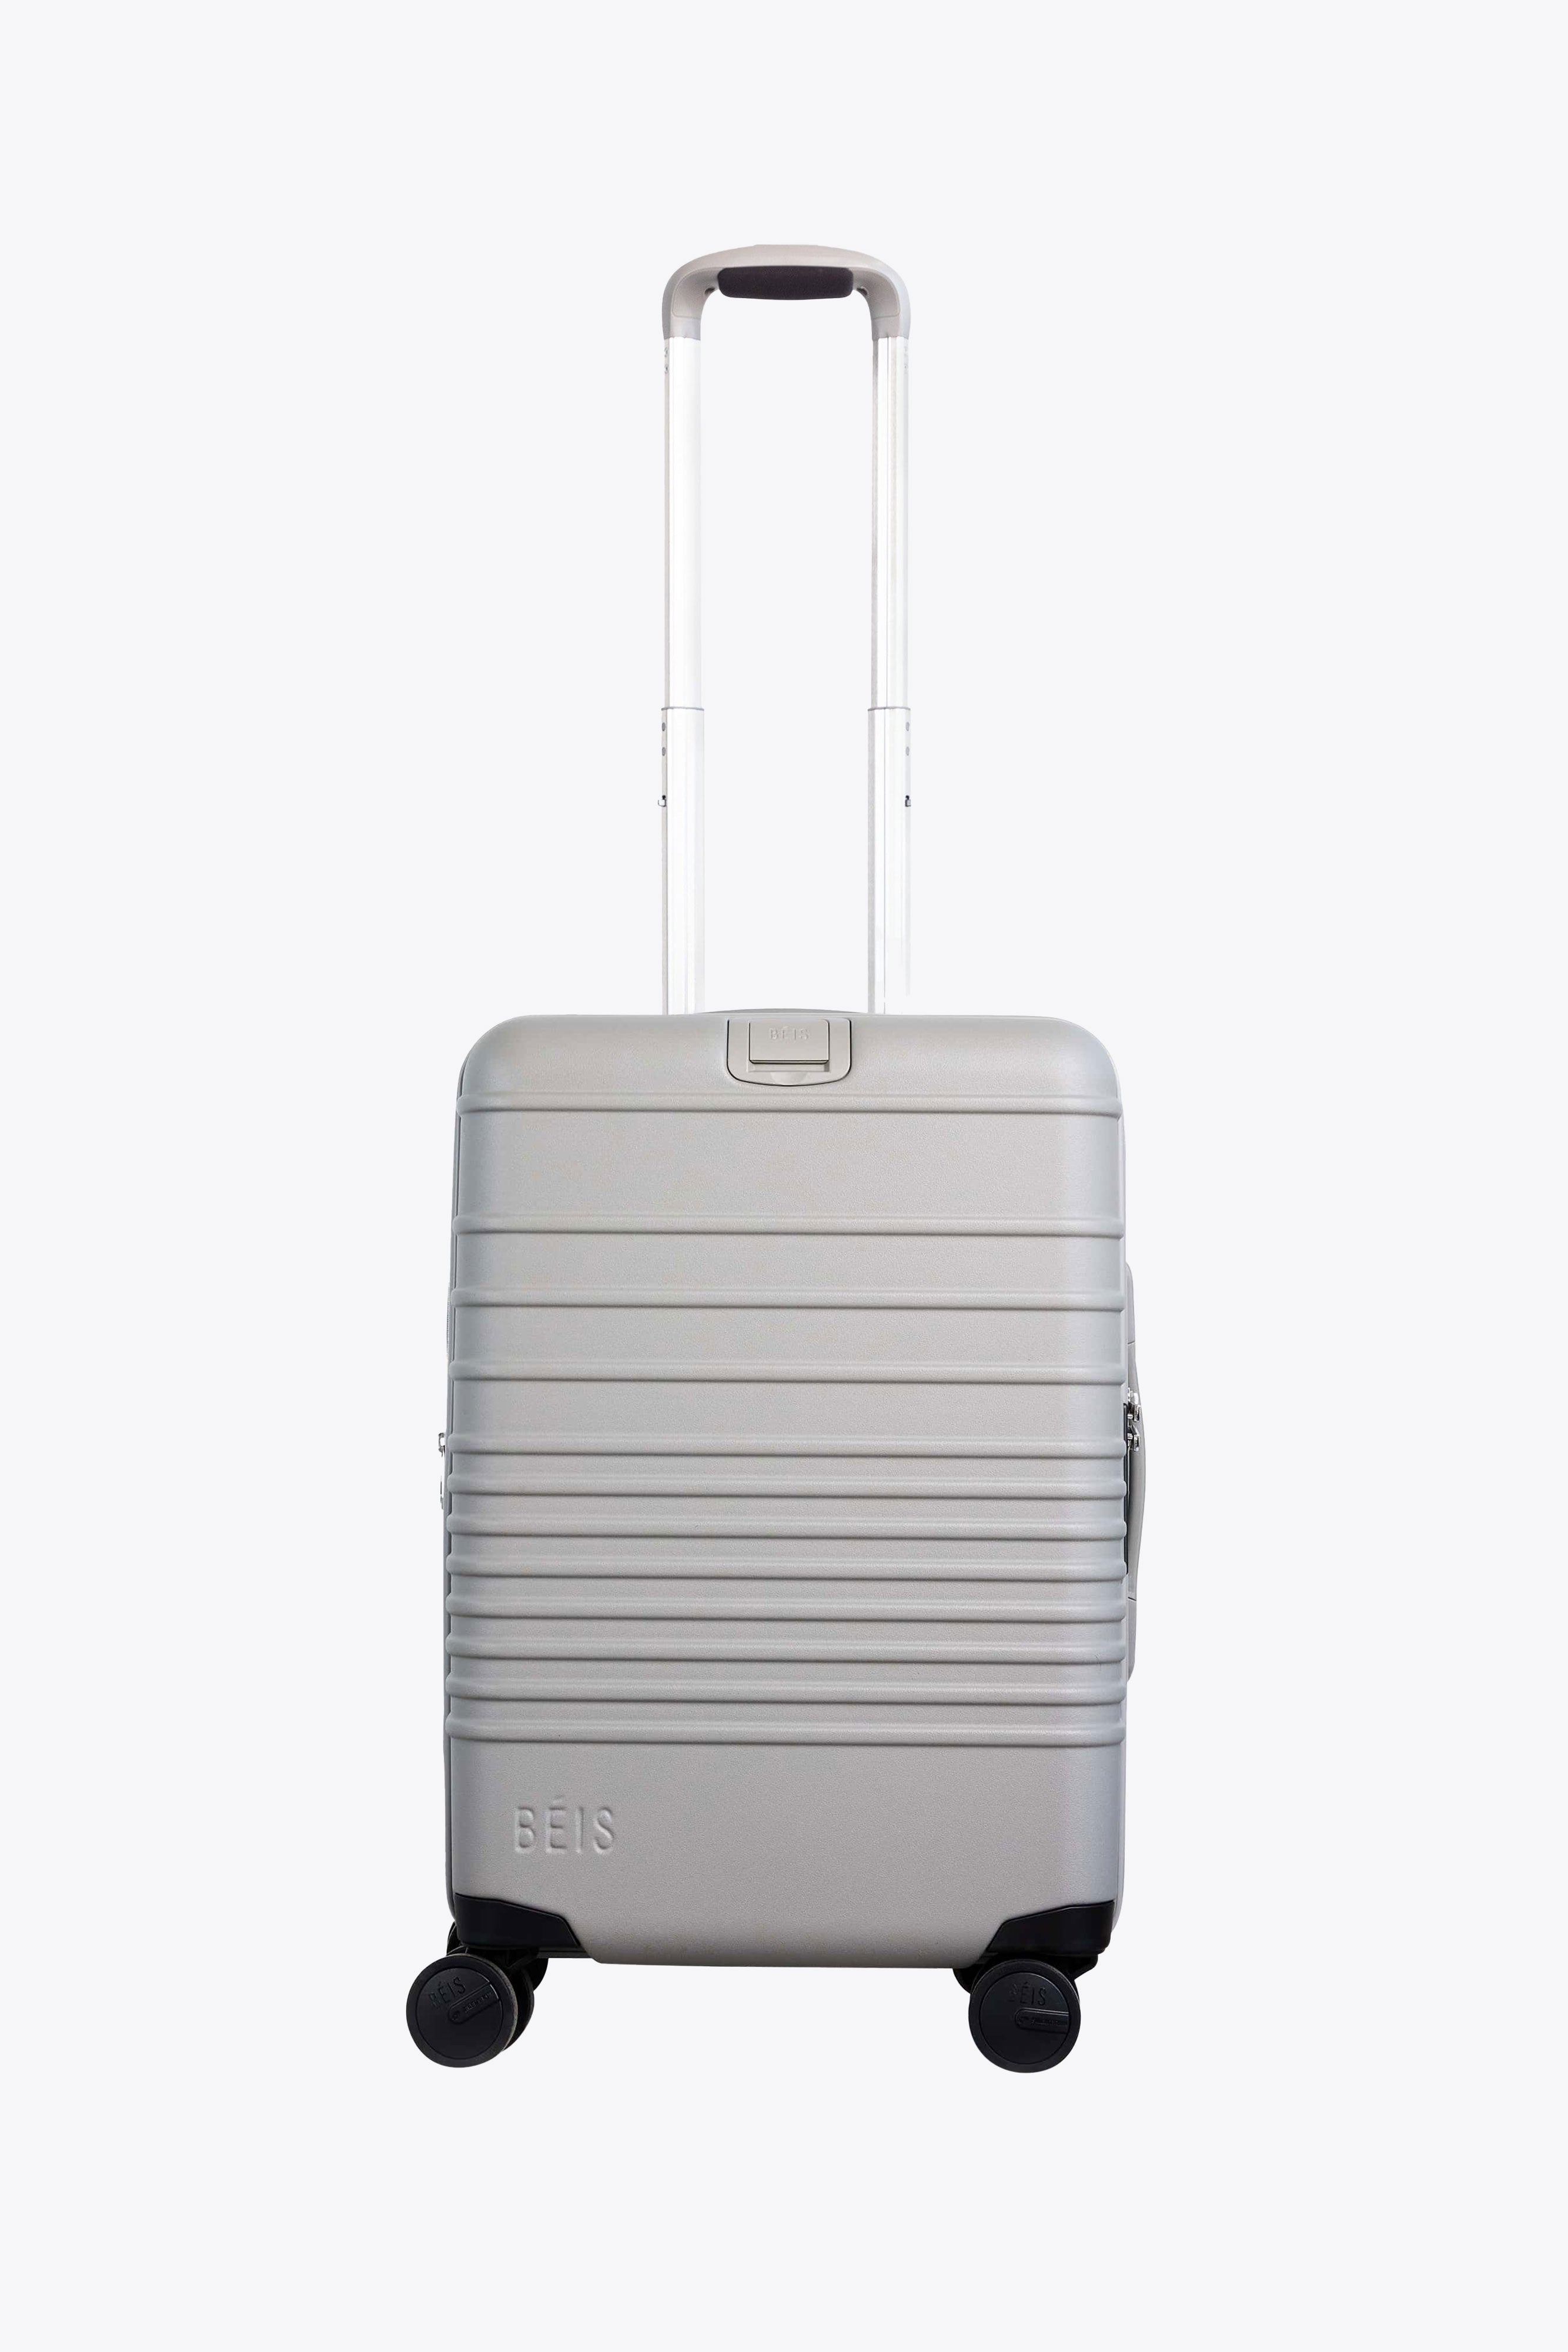 Carry-On Luggage - Hand Luggage & Carry On Suitcases